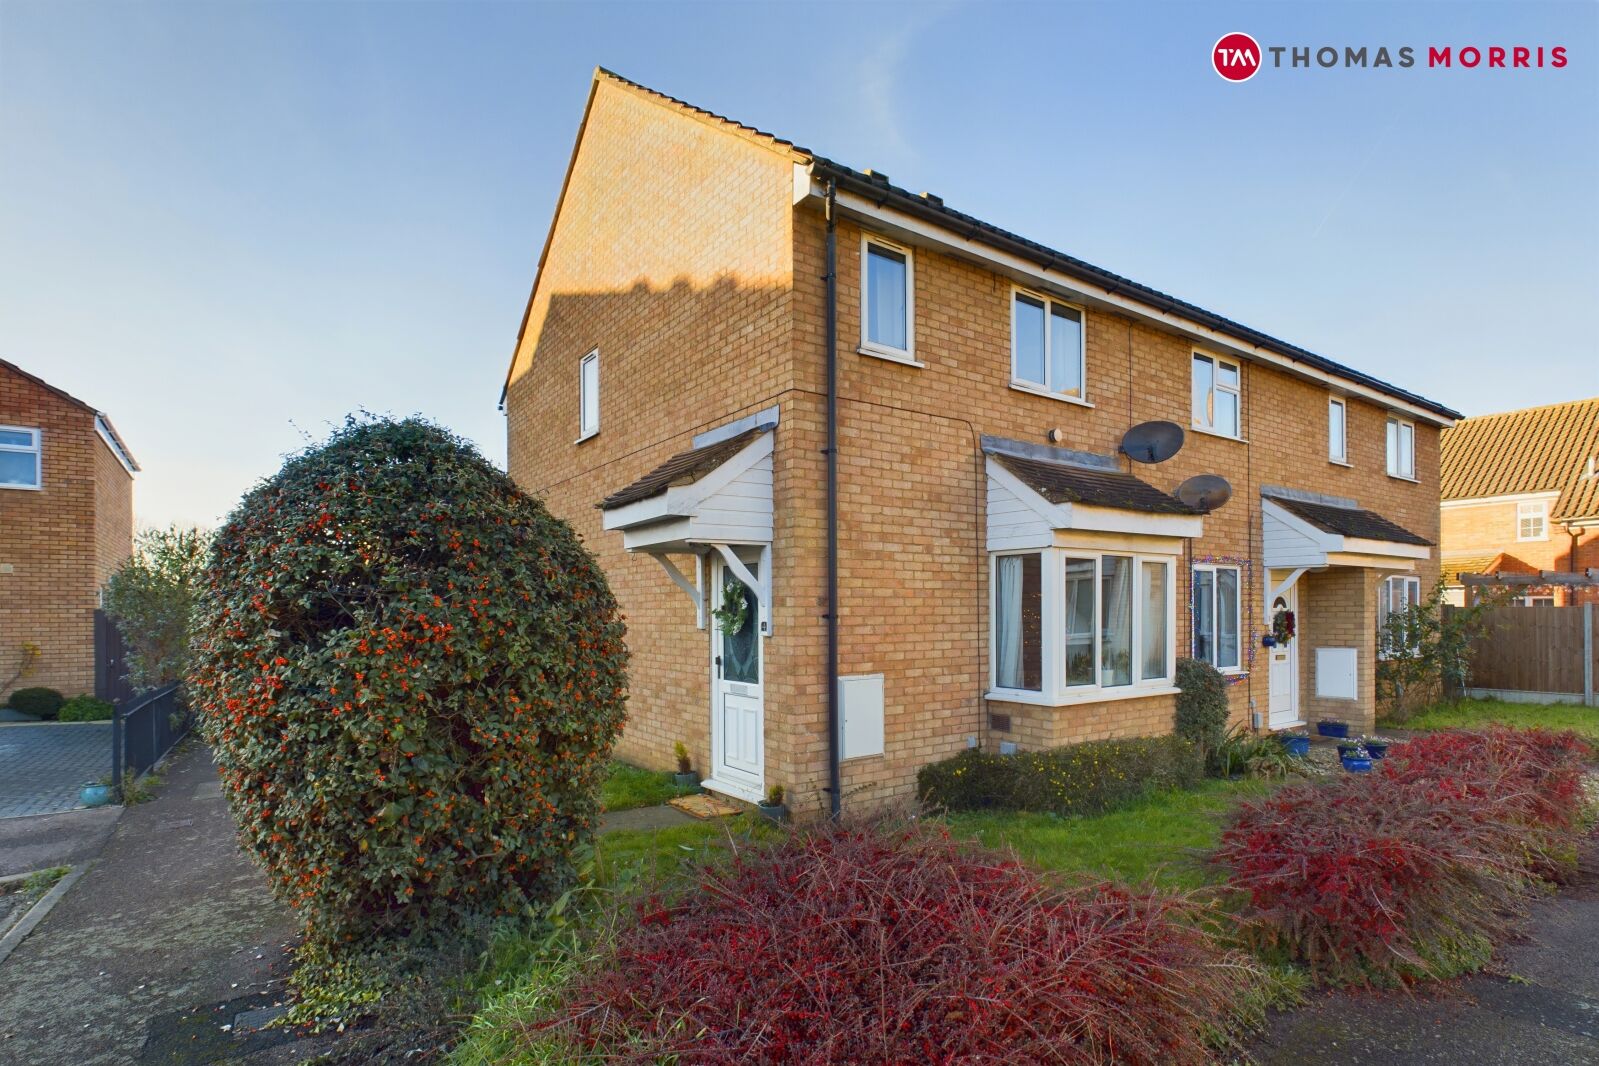 3 bedroom end terraced house for sale Durham Close, Biggleswade, SG18, main image